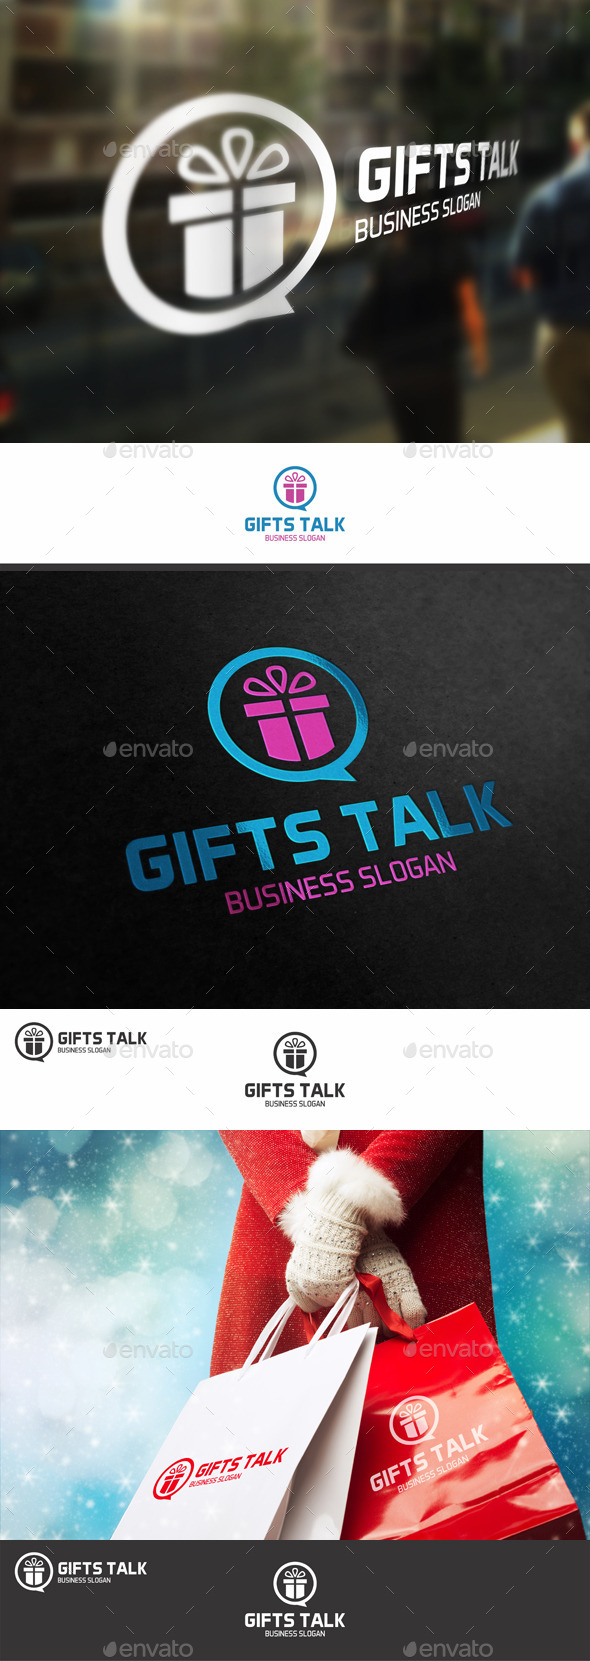 Talk About Gifts Logo